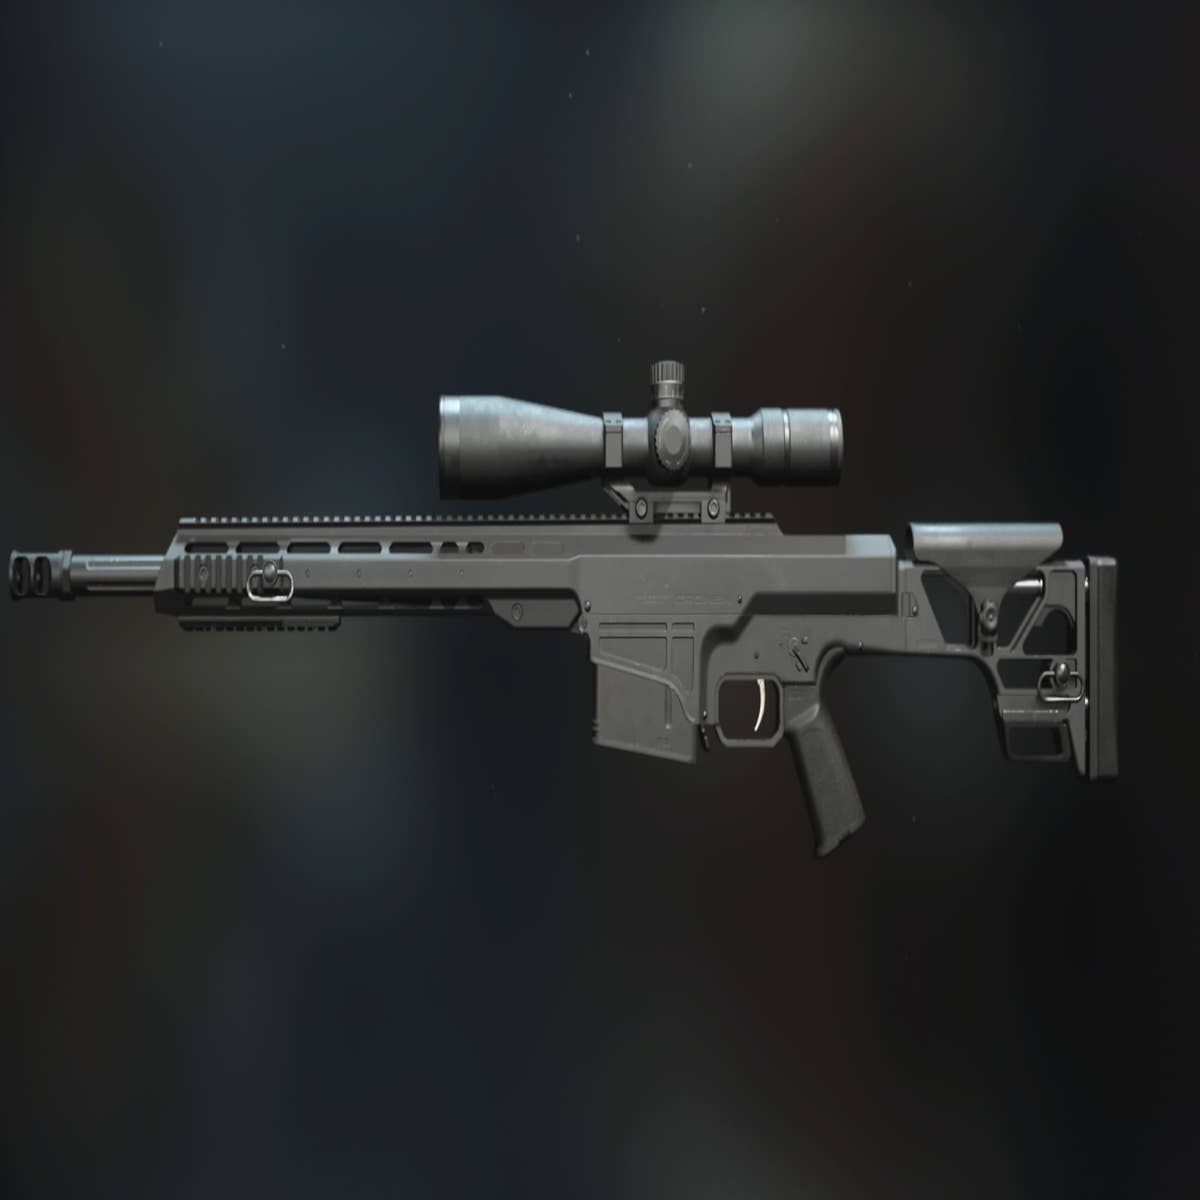 Warzone 2.0 loadout tips: A guide to the best guns and perks - The  Washington Post